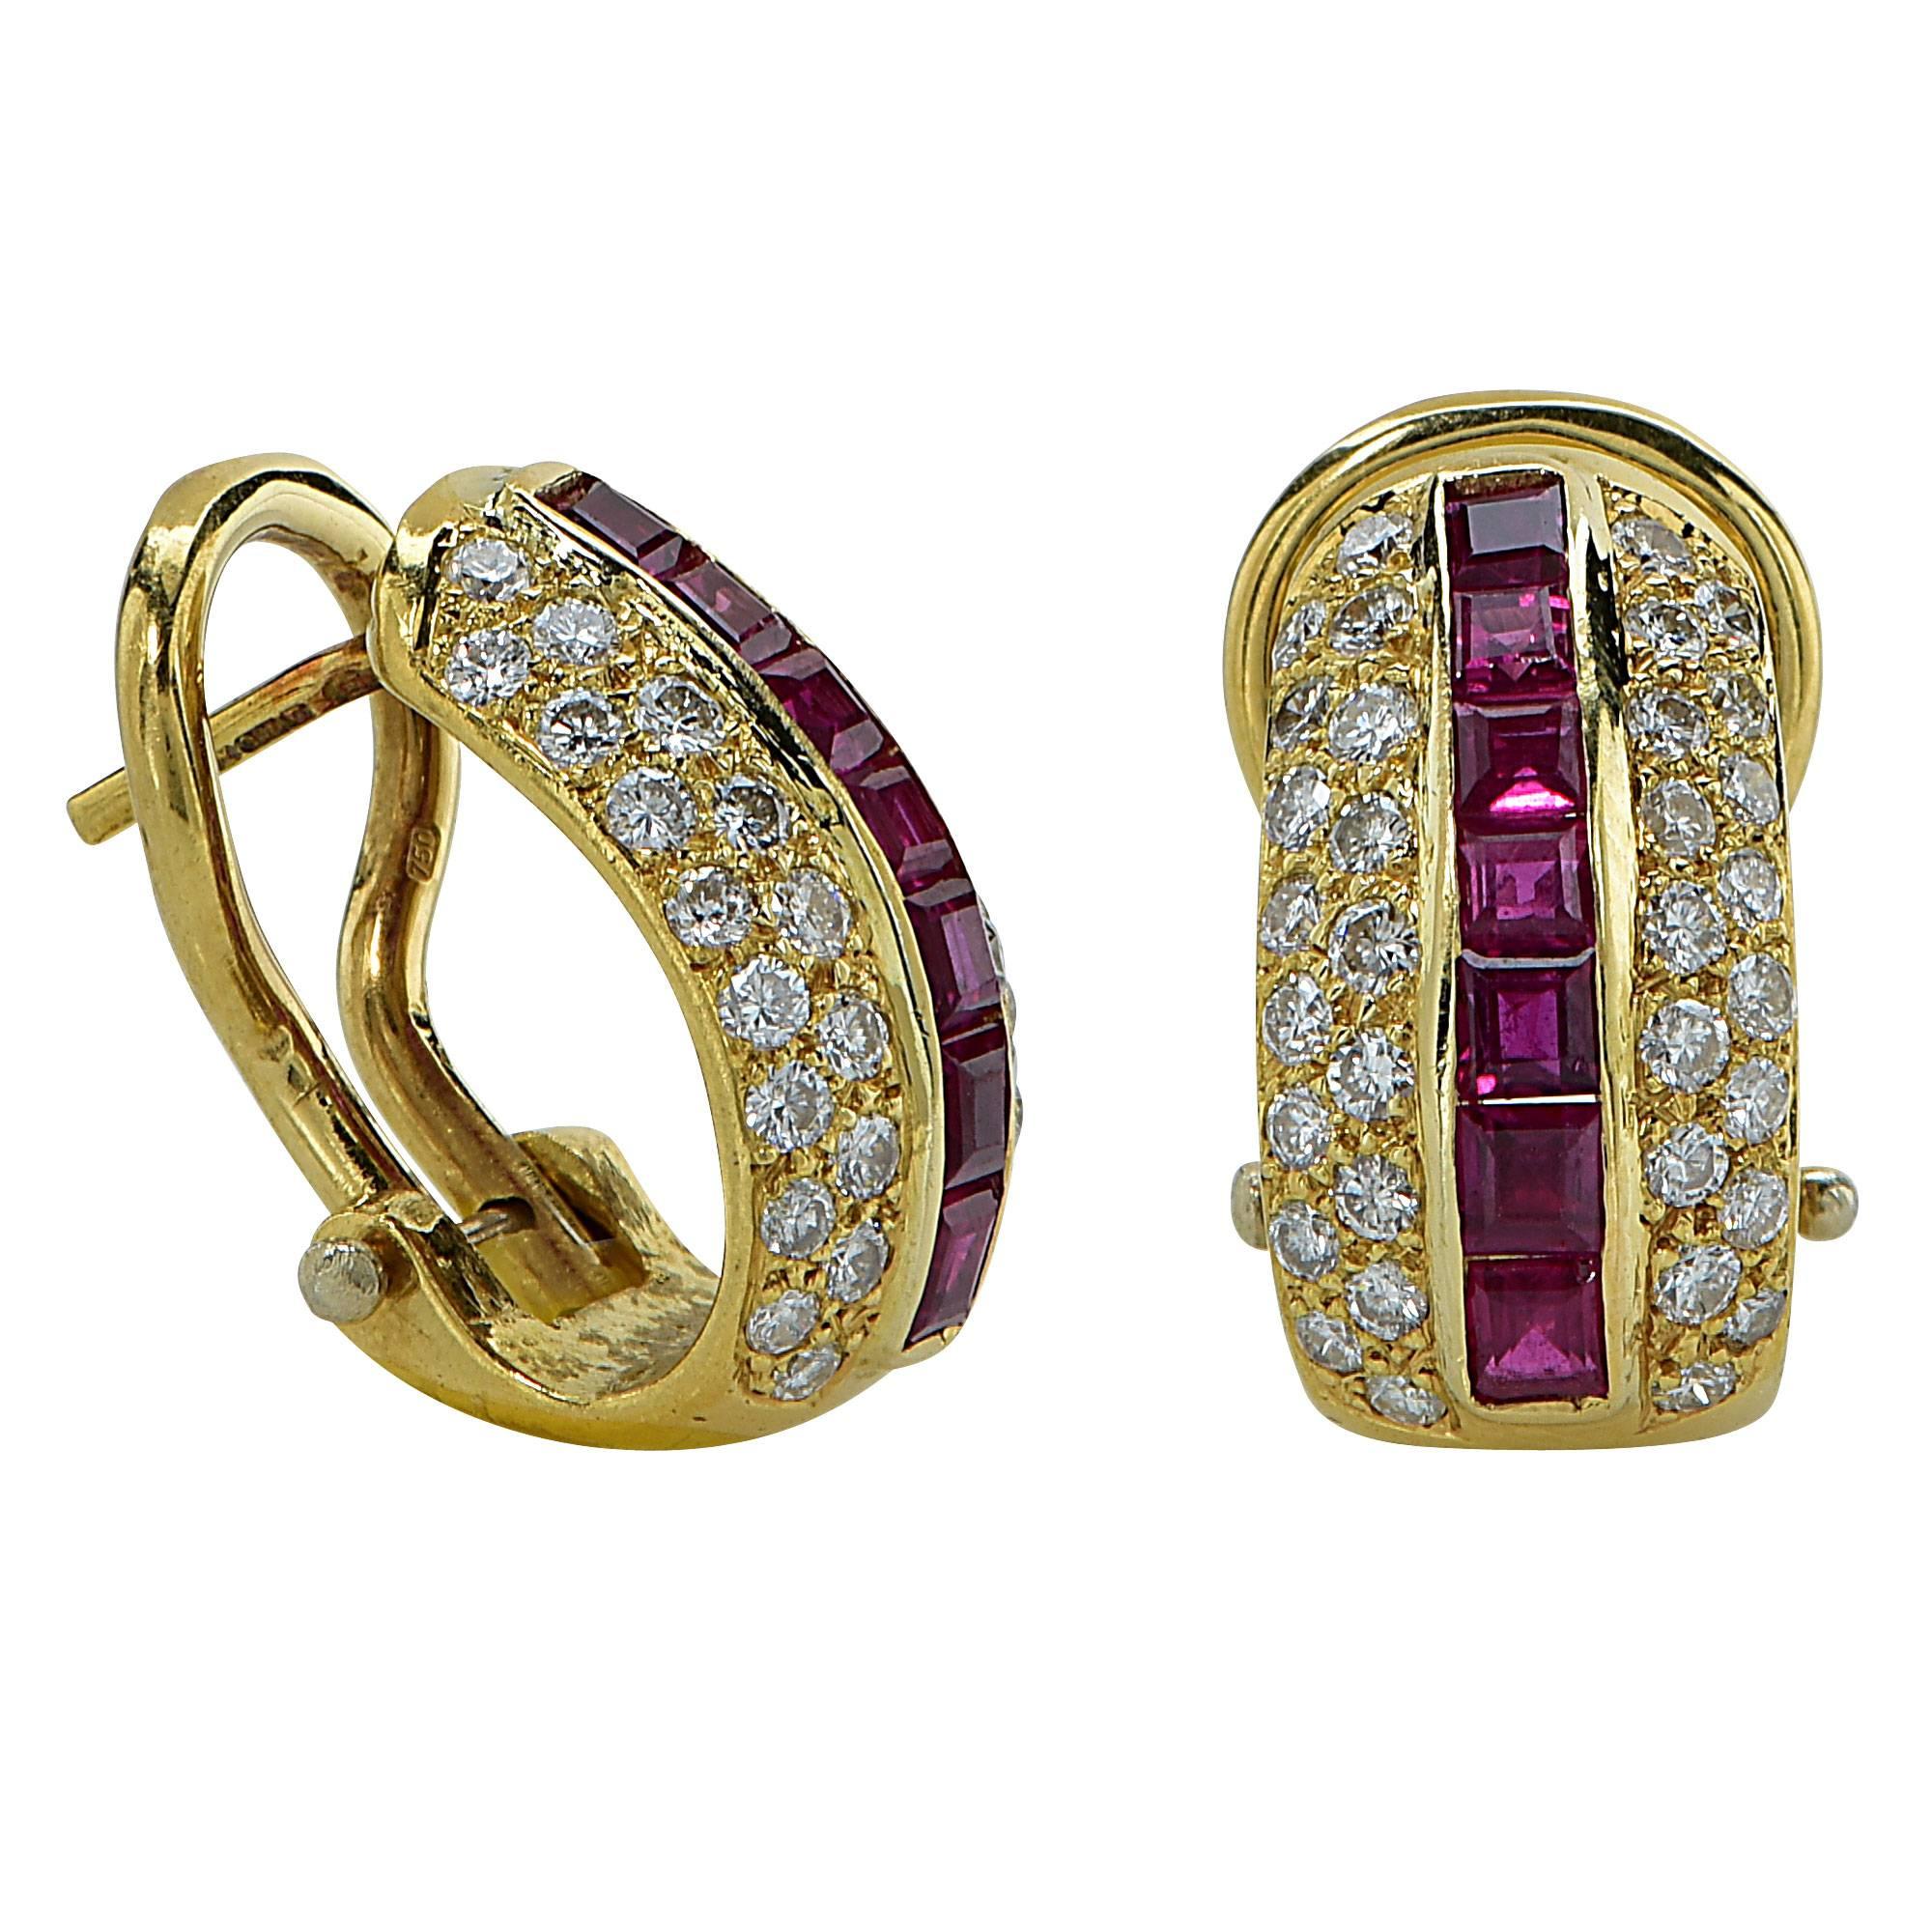 18k yellow gold earrings featuring 68 round brilliant cut diamonds weighing approximately .70cts, G color, VS clarity.

Metal weight: 8.39 grams

These diamond and ruby earrings are accompanied by a retail appraisal performed by a Graduate